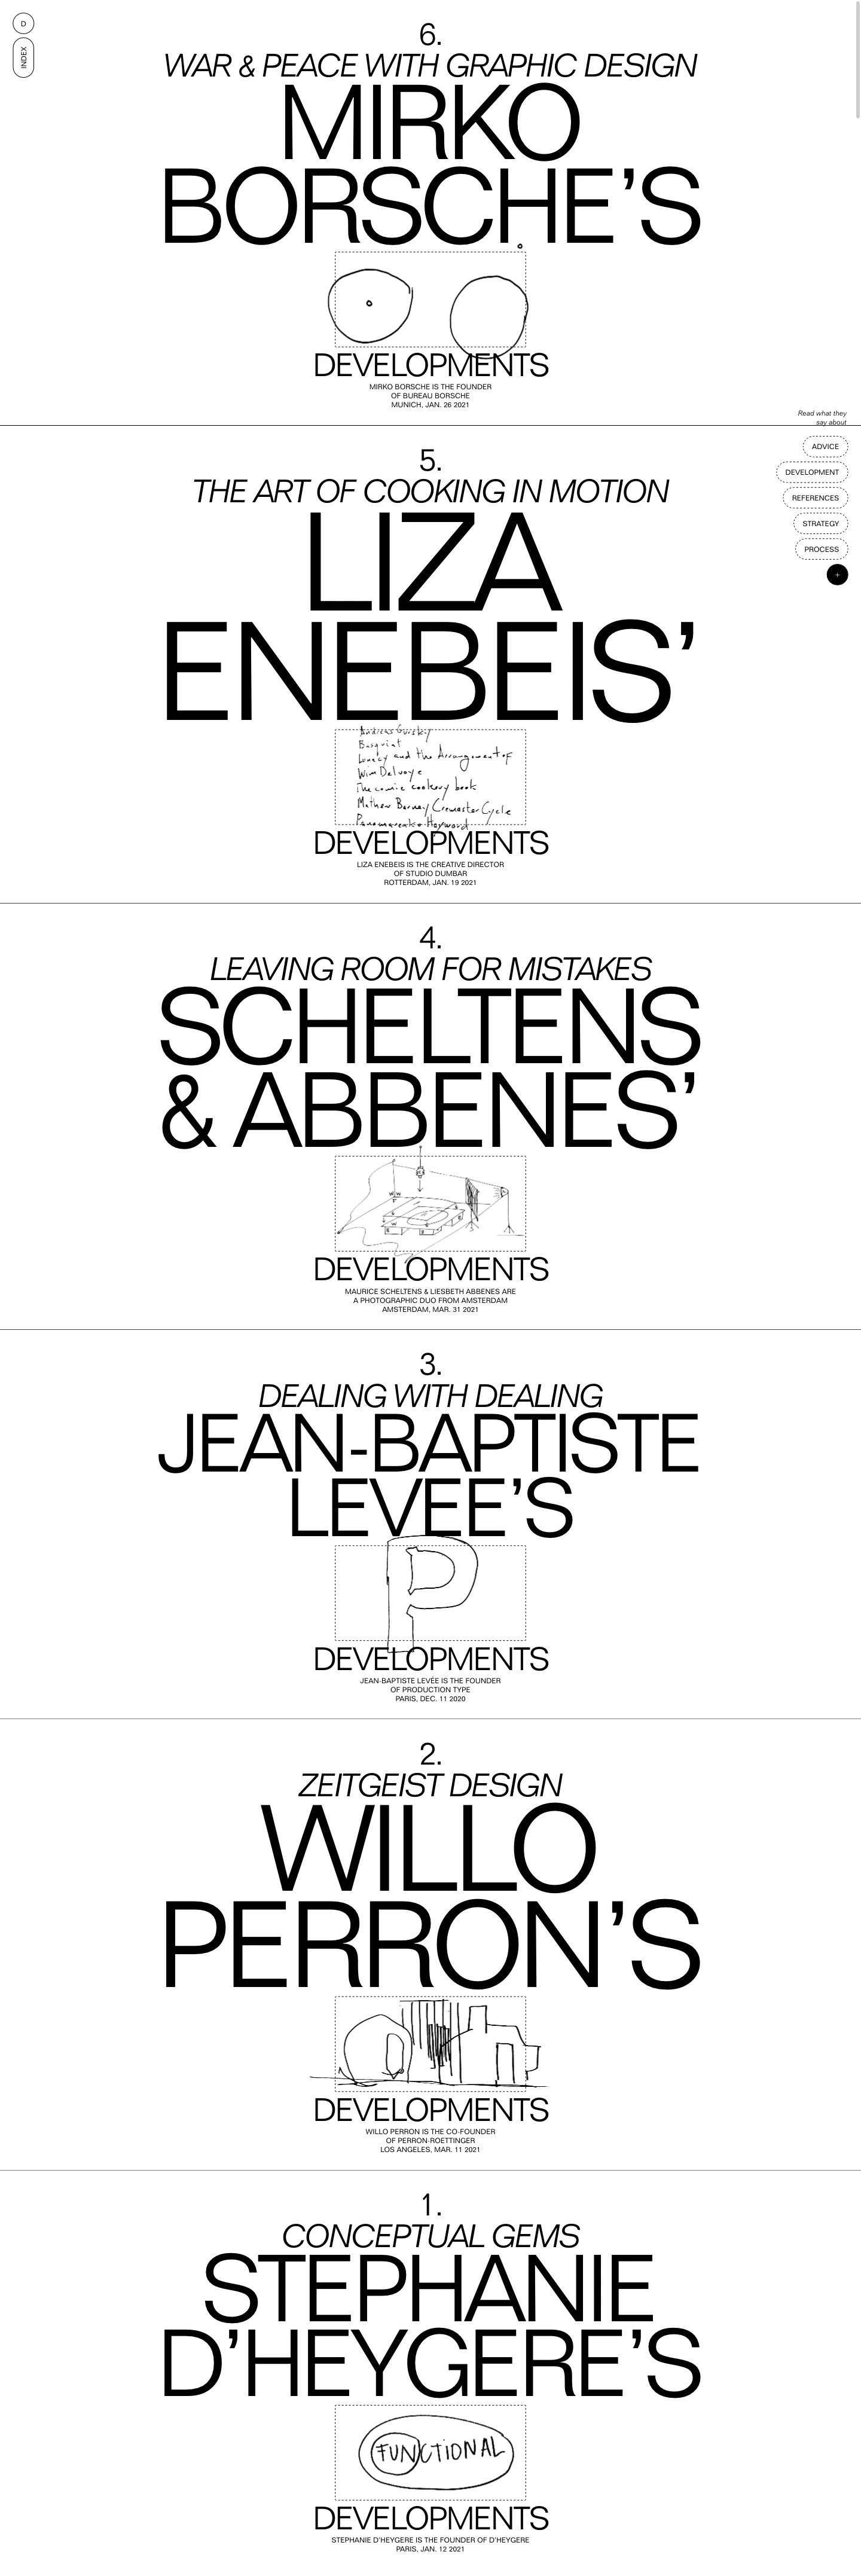 Developments Landing Page Example: Developments is a slow paced online media offering in depth interviews with strategic minds amongst the independent creative talents, whether they are emerging or world famous.